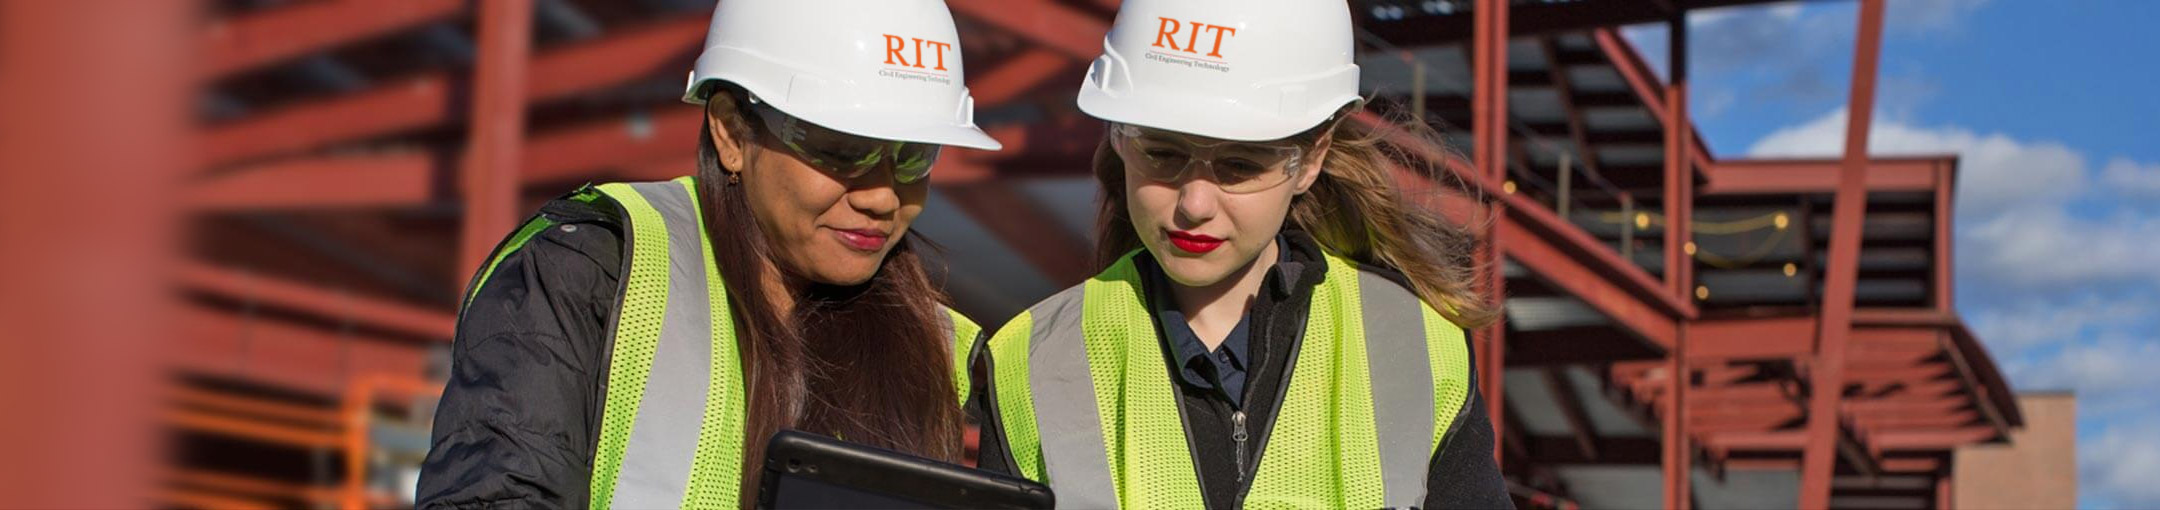 Two women wearing hard hats that say RIT look down at tablet computers. They are standing in from of a construction site.